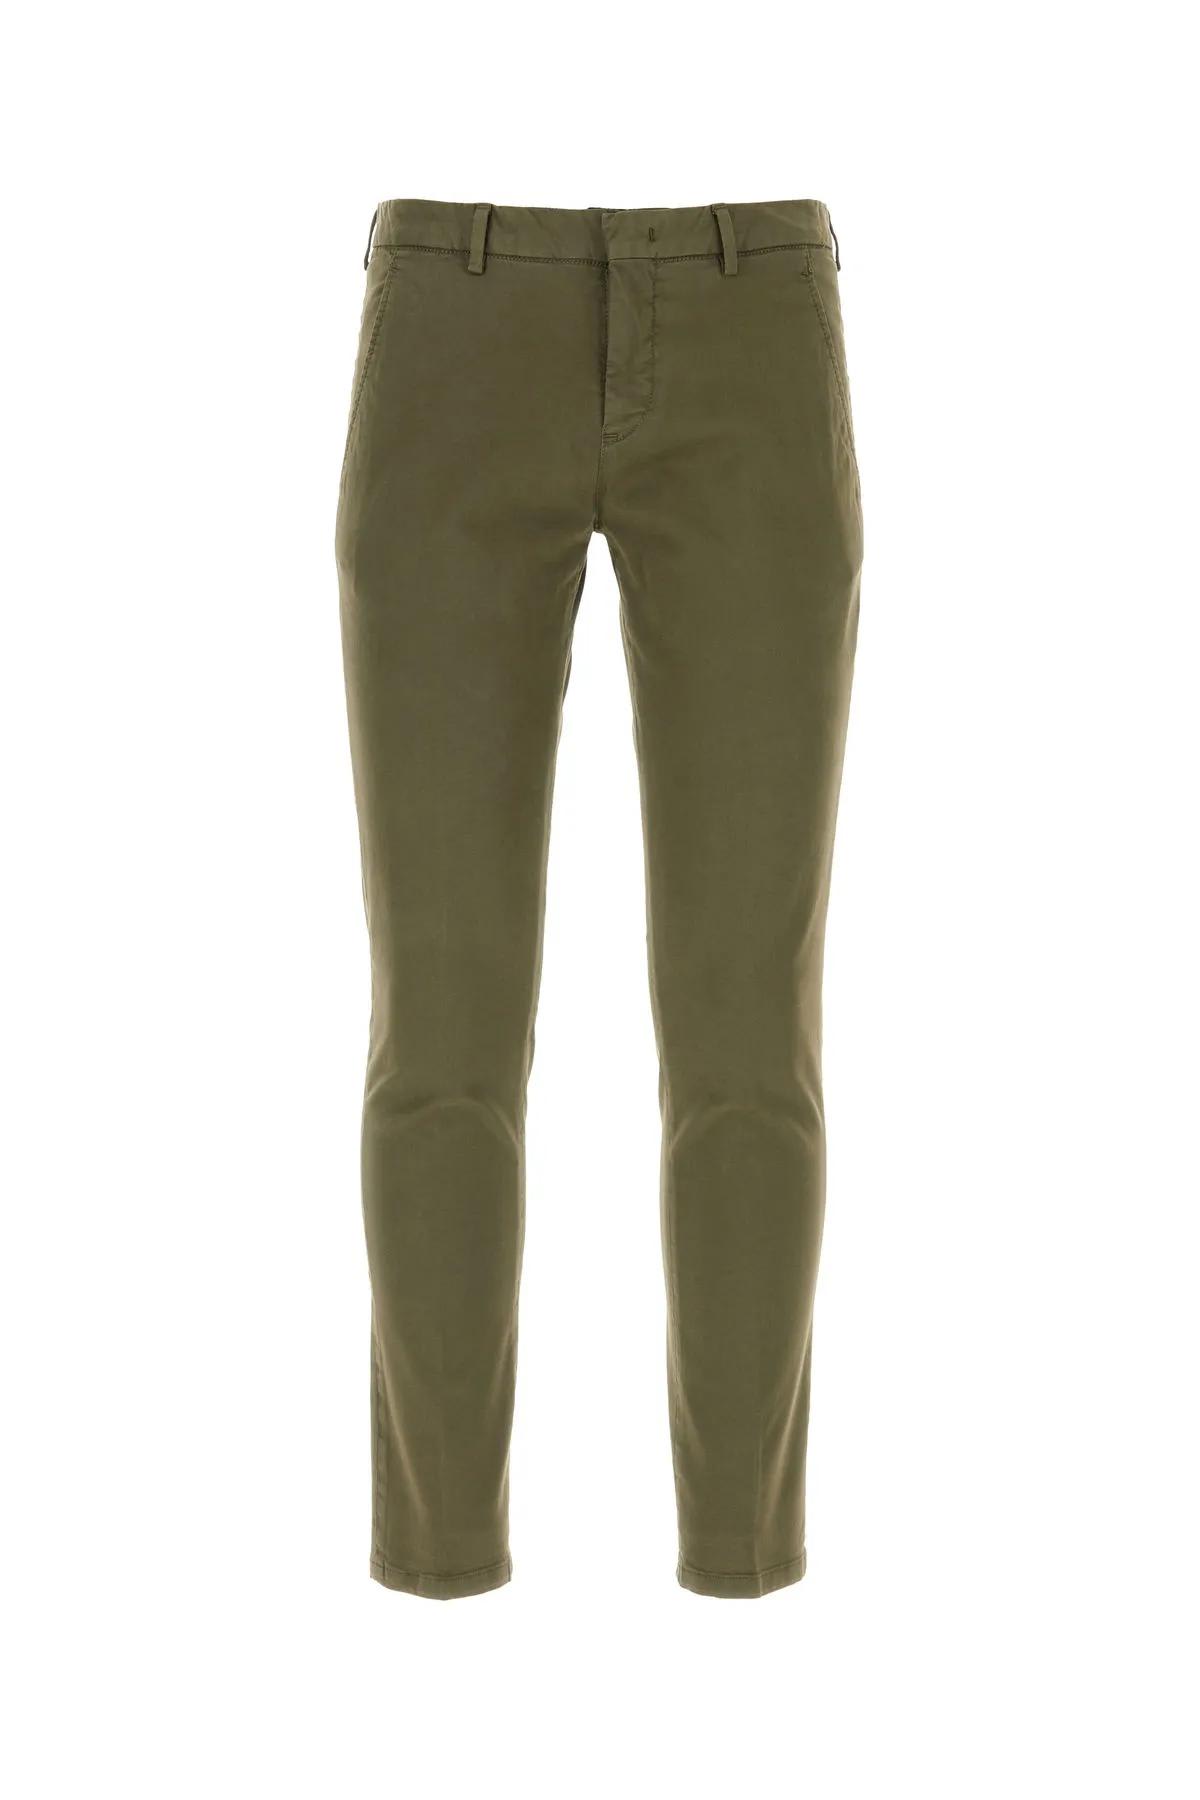 Pt01 Olive Green Stretch Cotton Pant